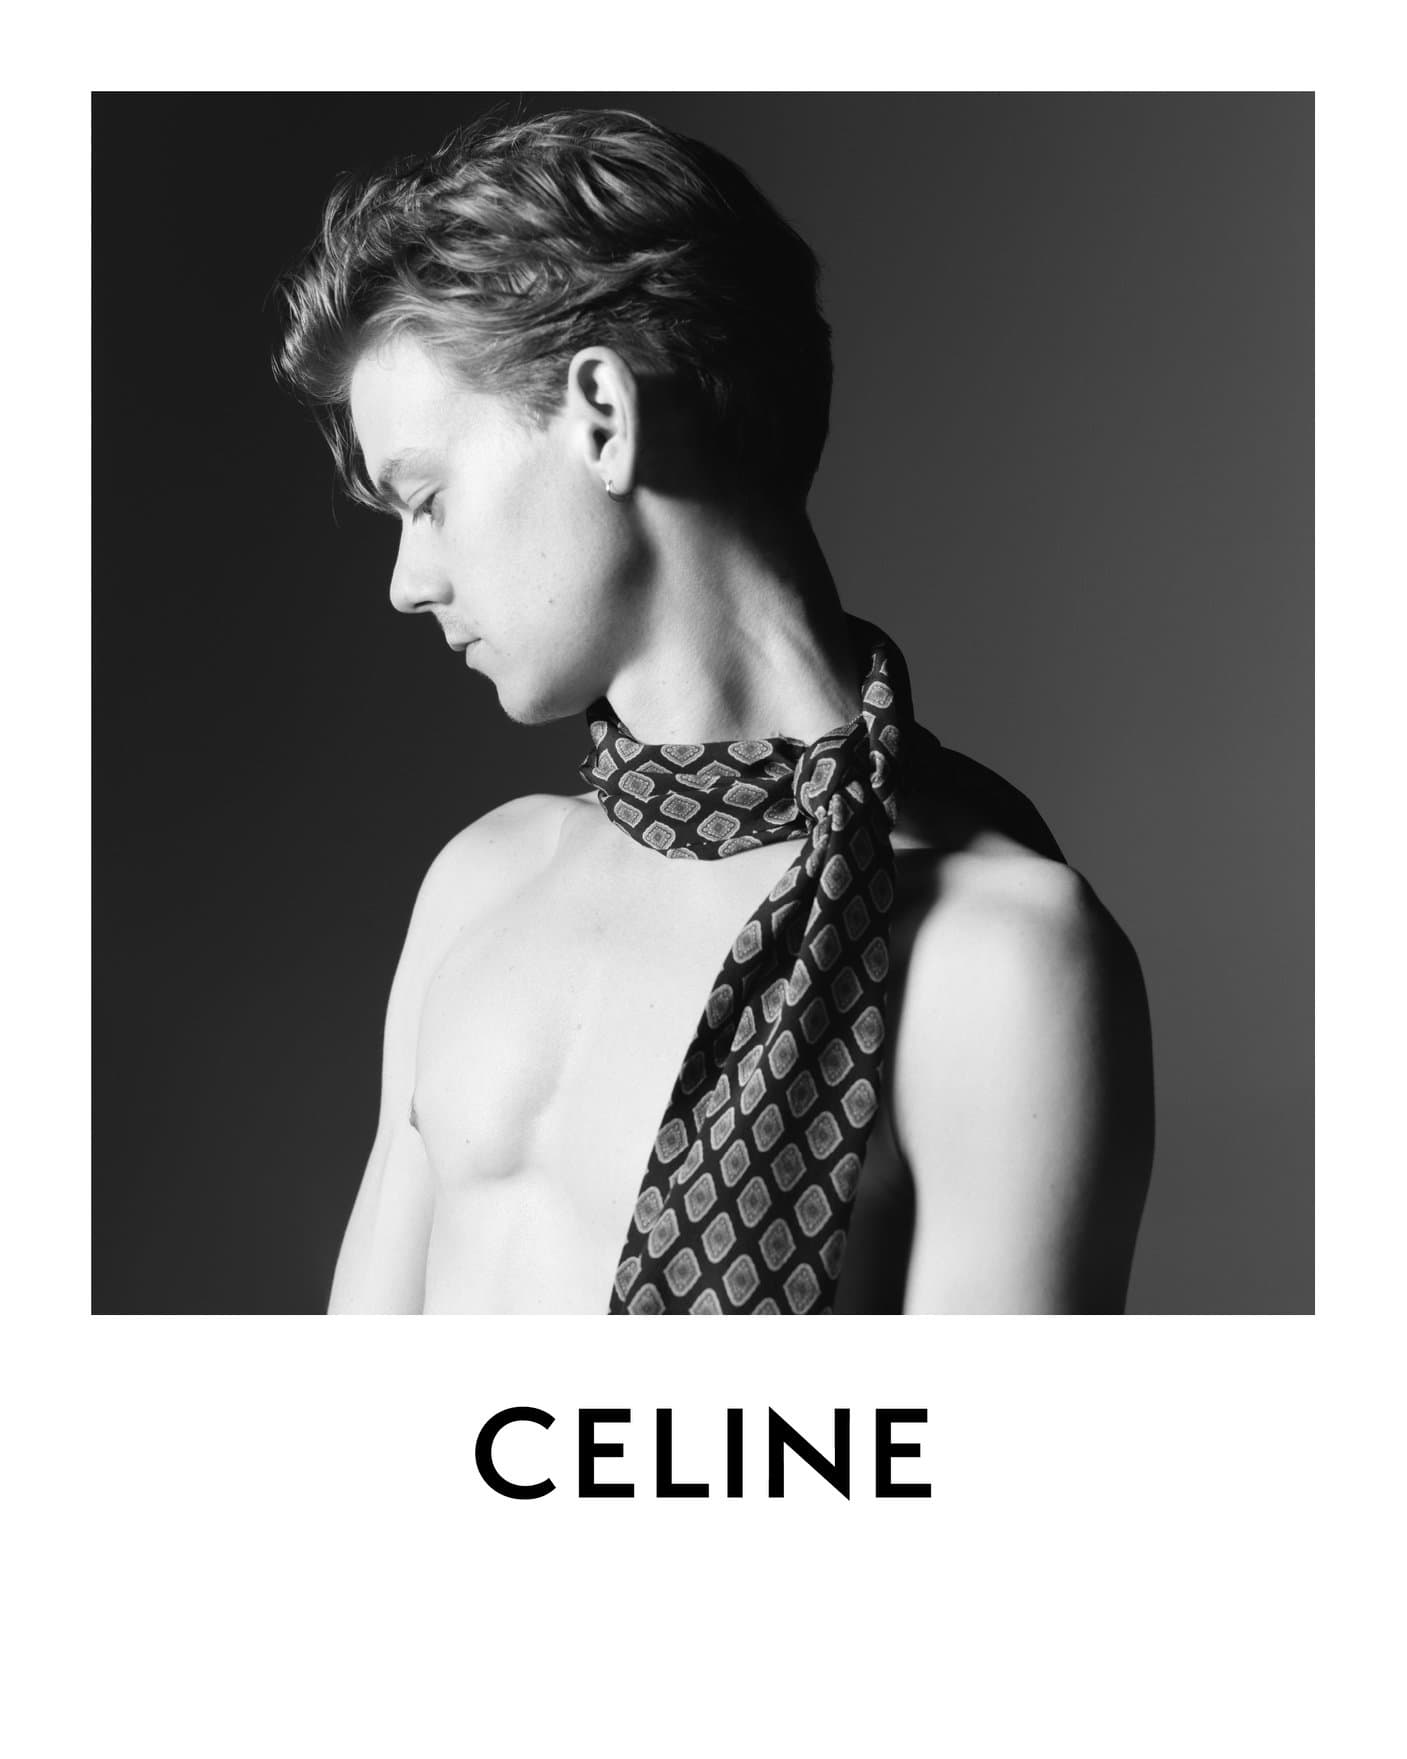 Celine 'Portrait of an Actor' Spring 2021 Ad Campaign with Thomas ...